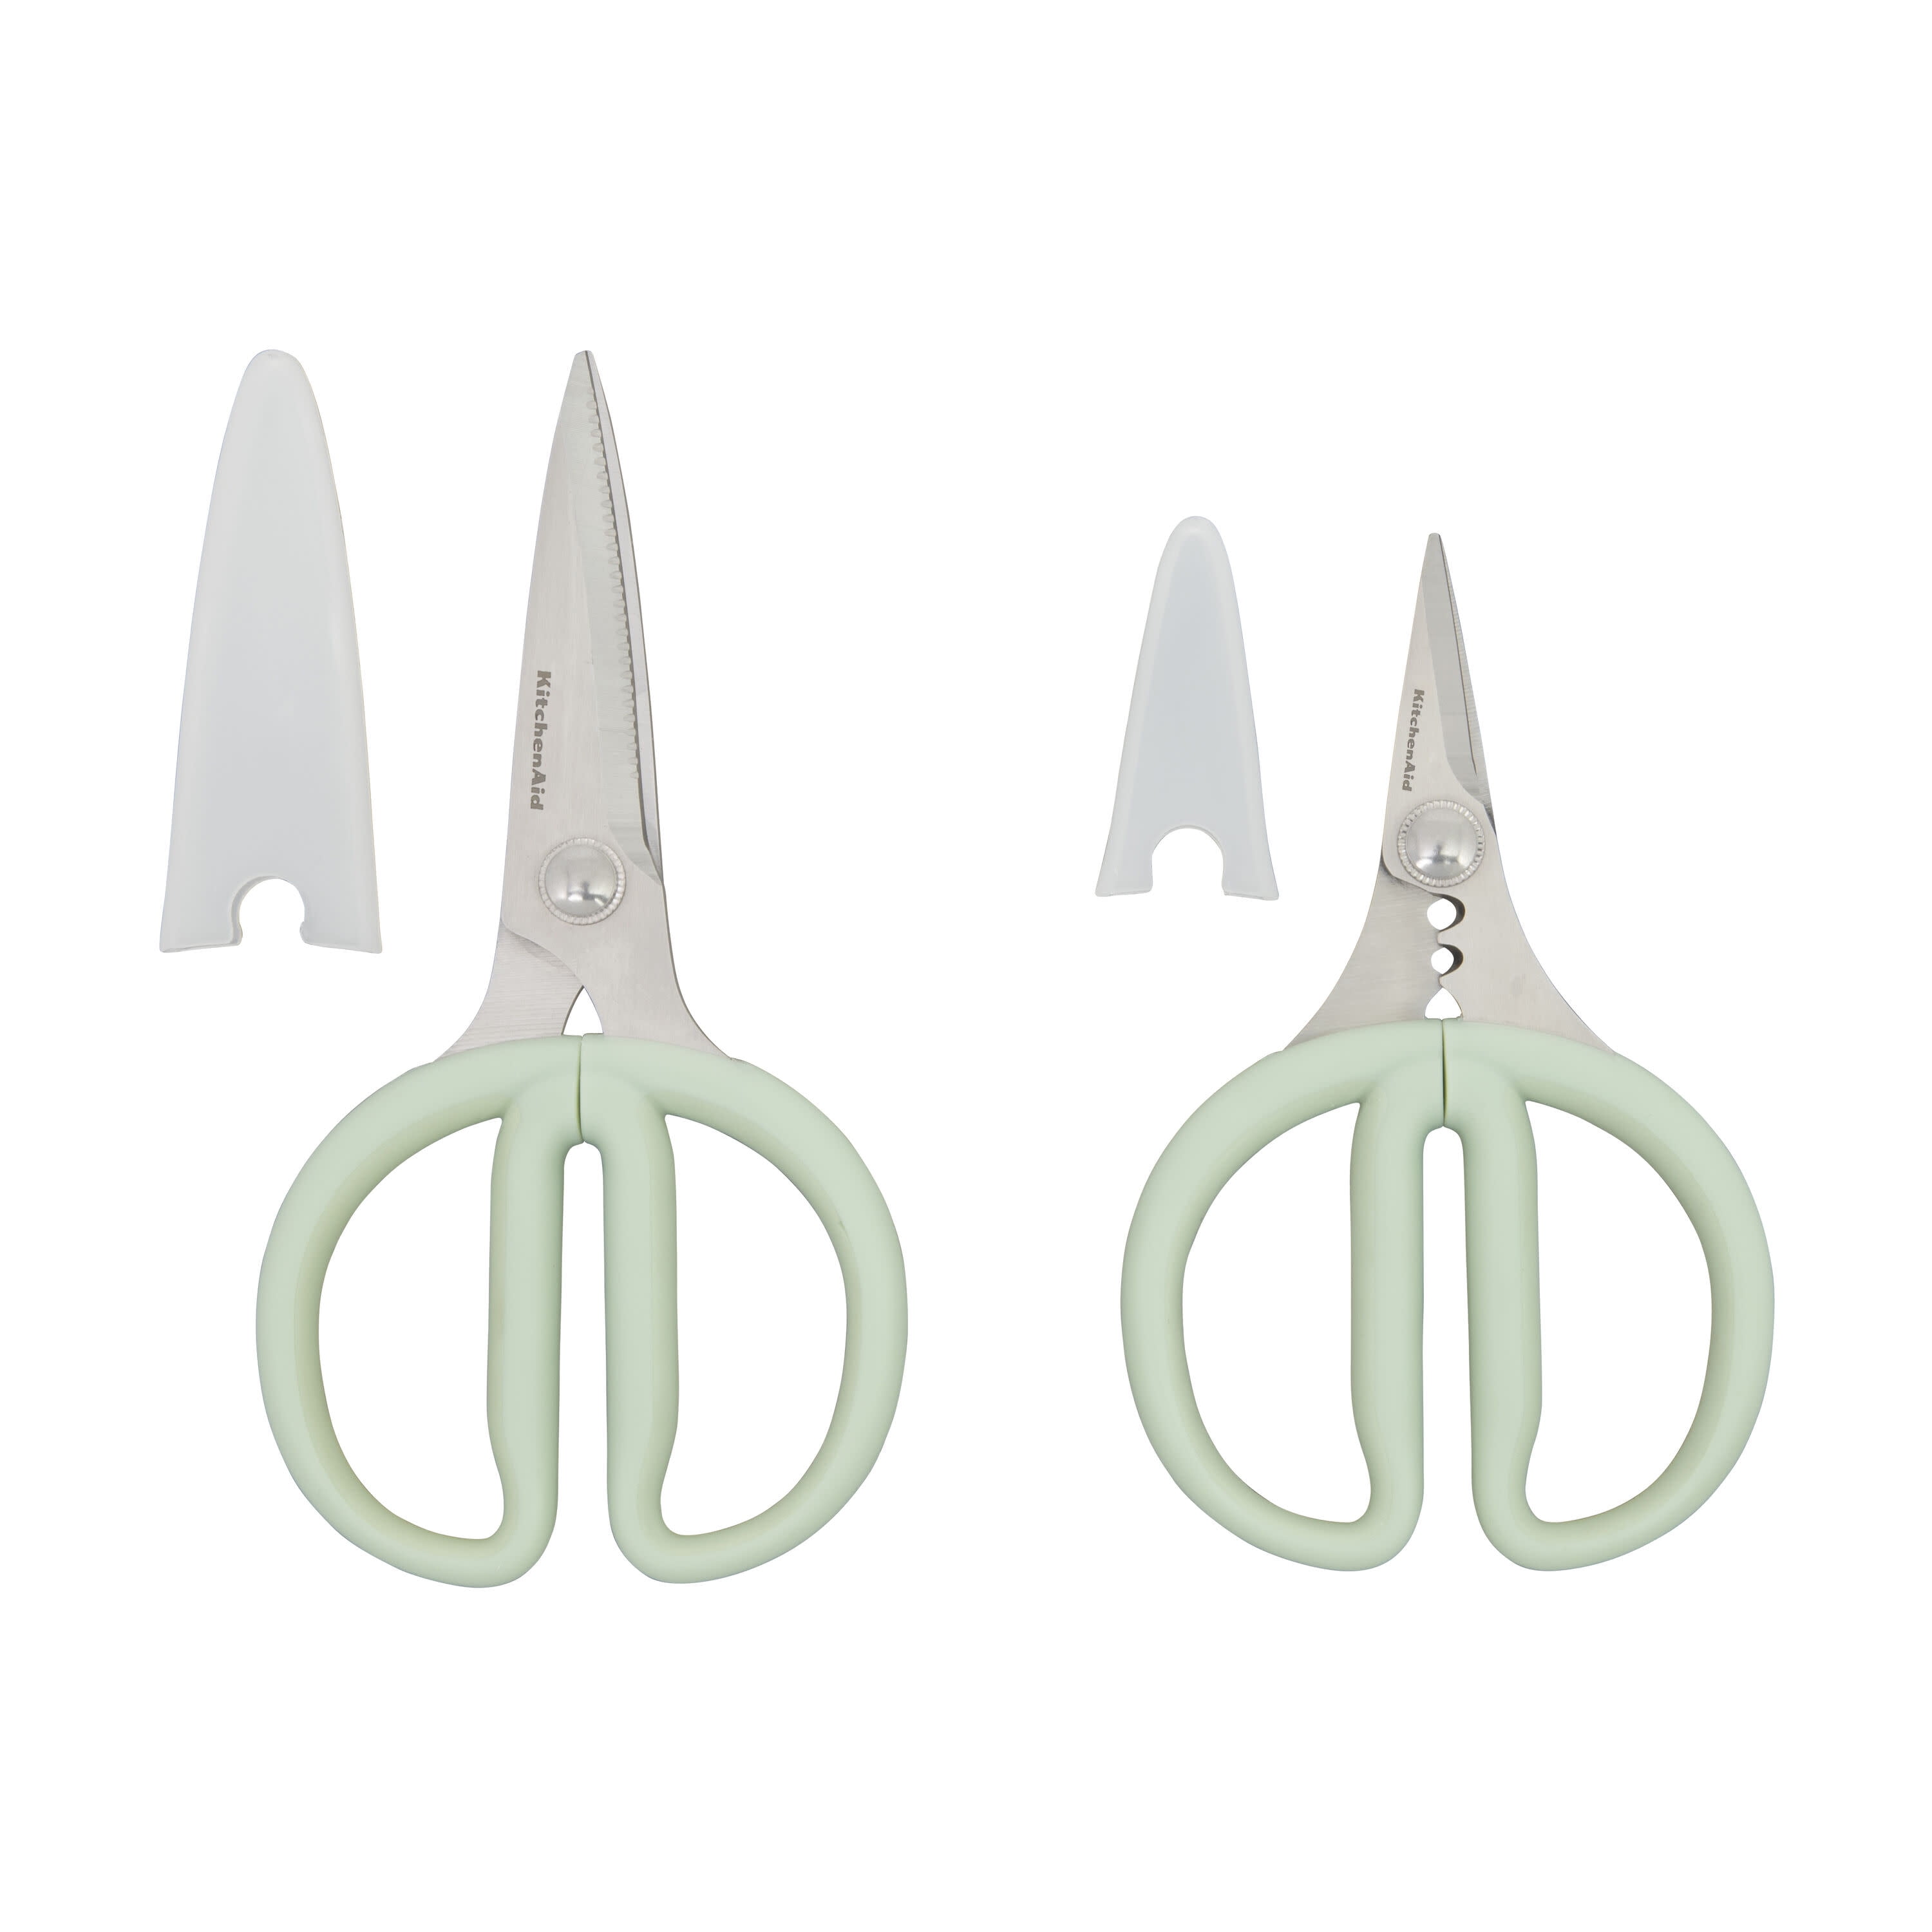 KitchenAid Set of 2 Soft Grip All Purpose Utility Shears in the